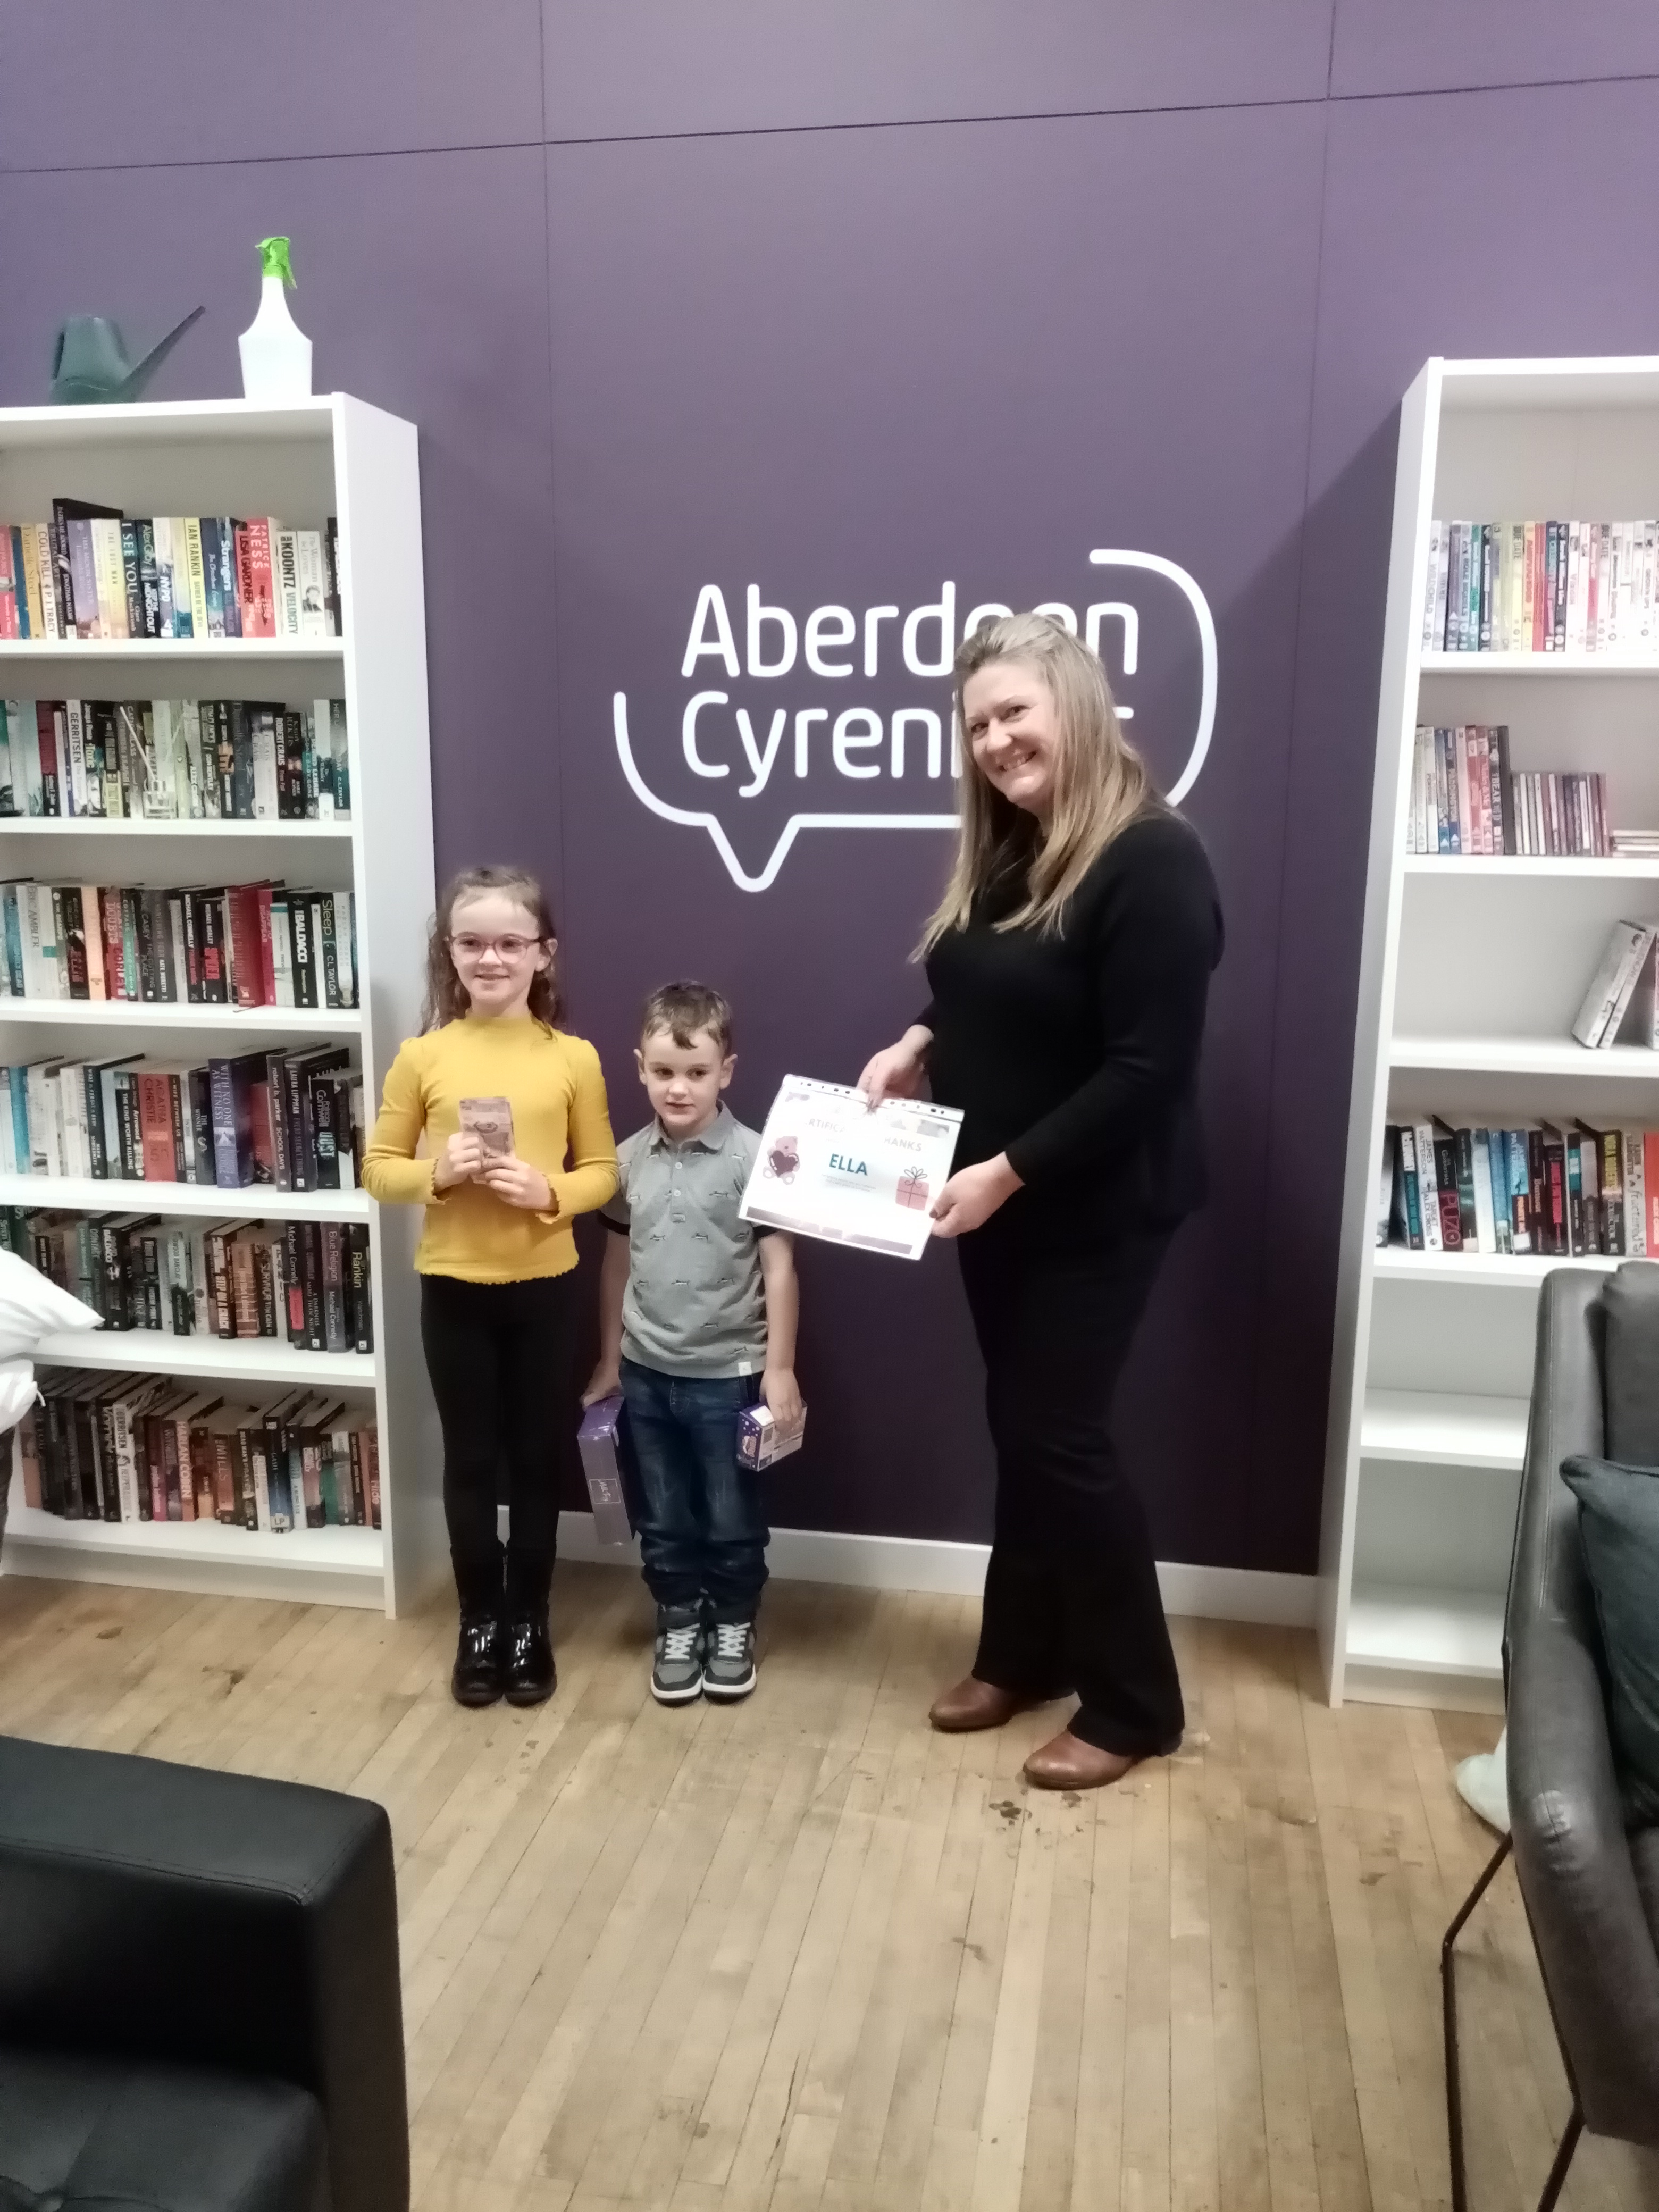 Seven-year-old gives up birthday gifts to raise £250 for Aberdeen Cyrenians